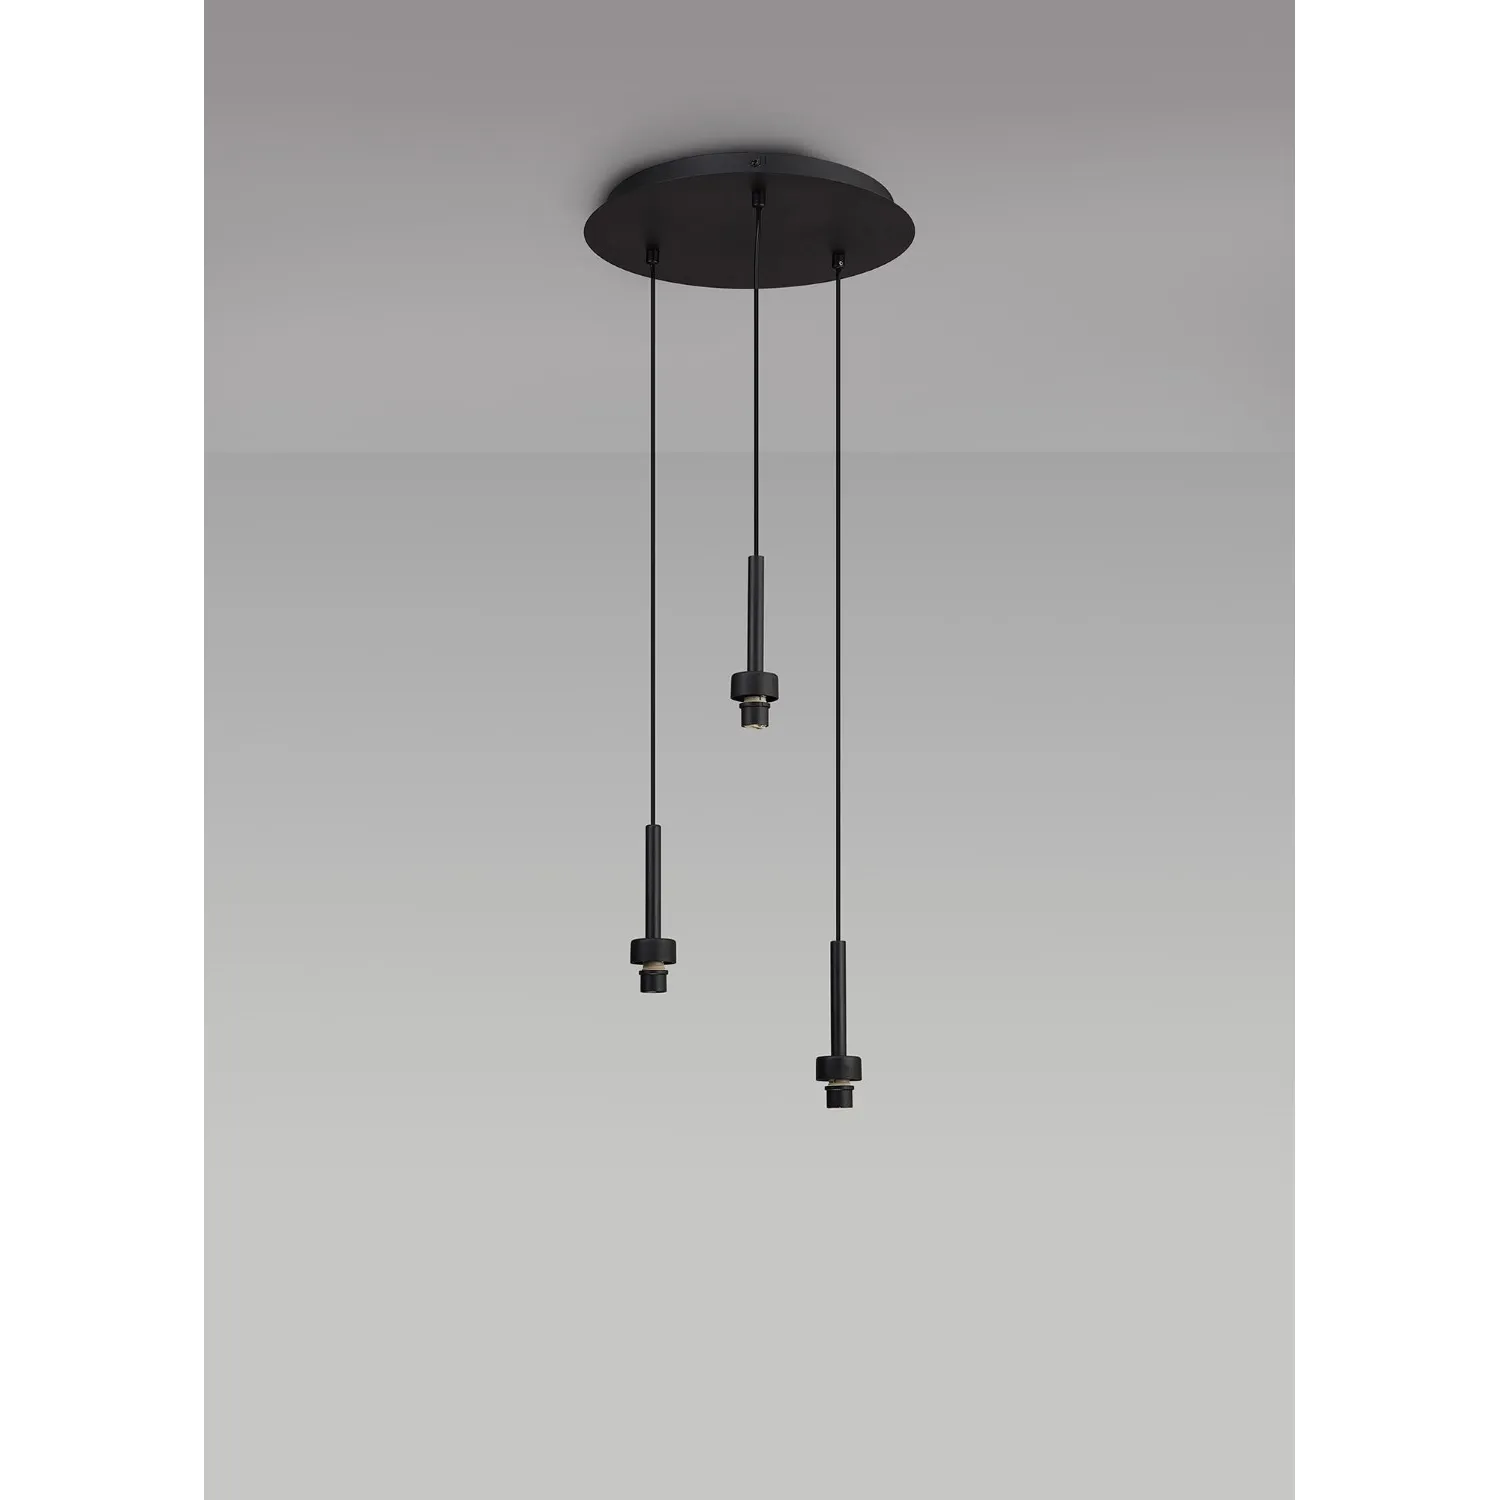 Abingdon Satin Black 3 Light G9 Universal 2m Round Pendant, Suitable For A Vast Selection Of Glass Shades